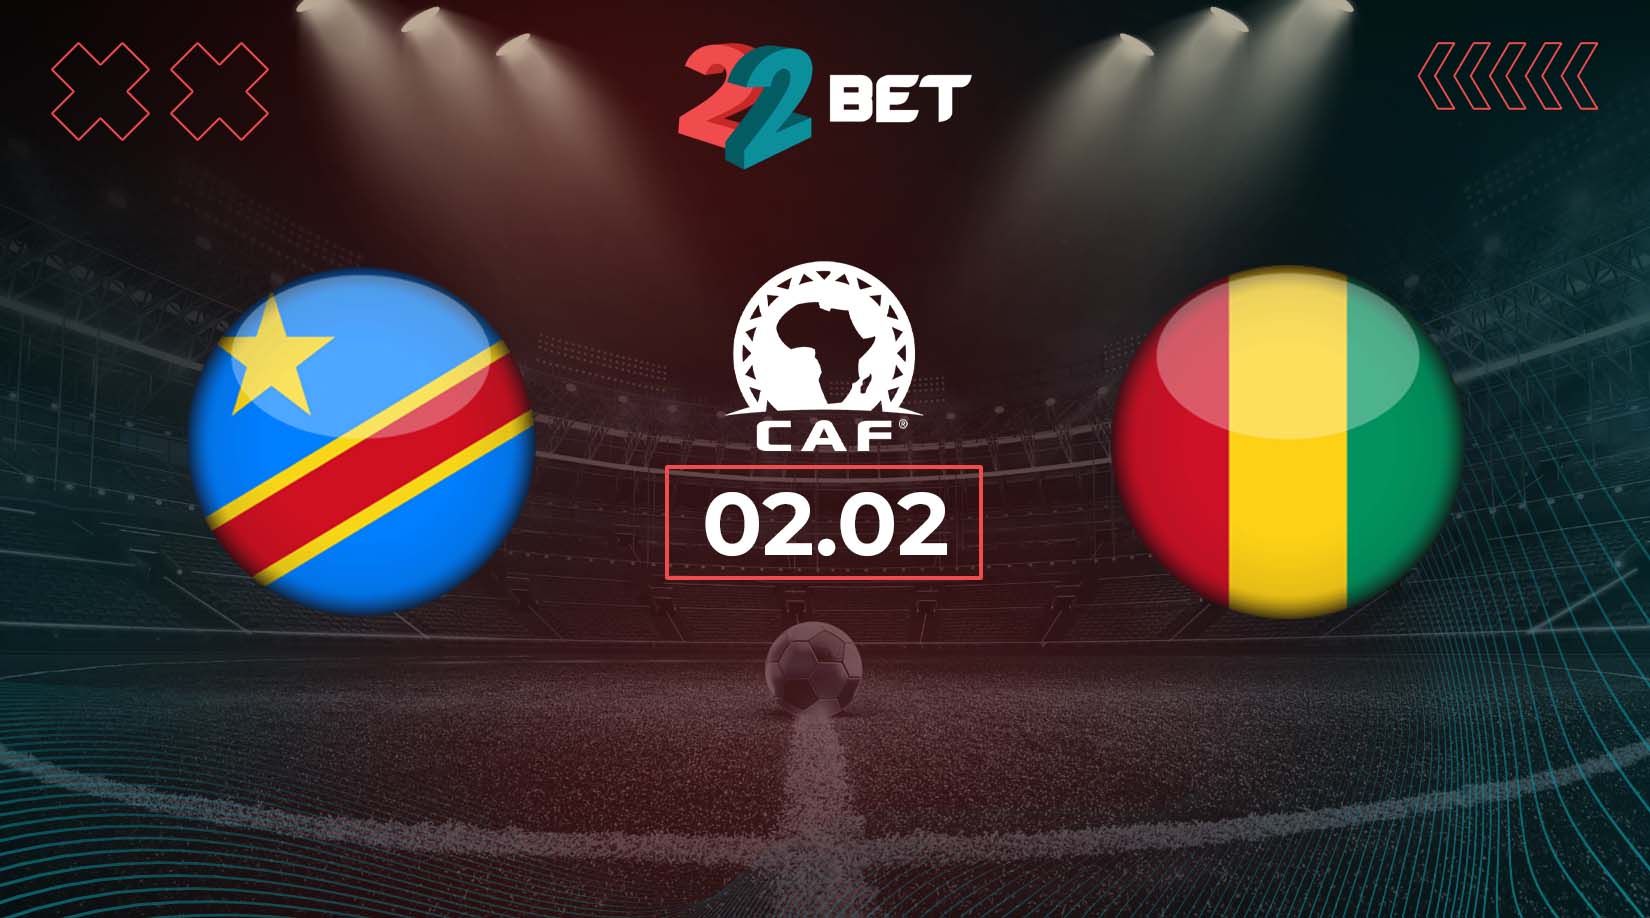 DR Congo vs Guinea Prediction: Africa Cup of Nations Match on 02.02.2024